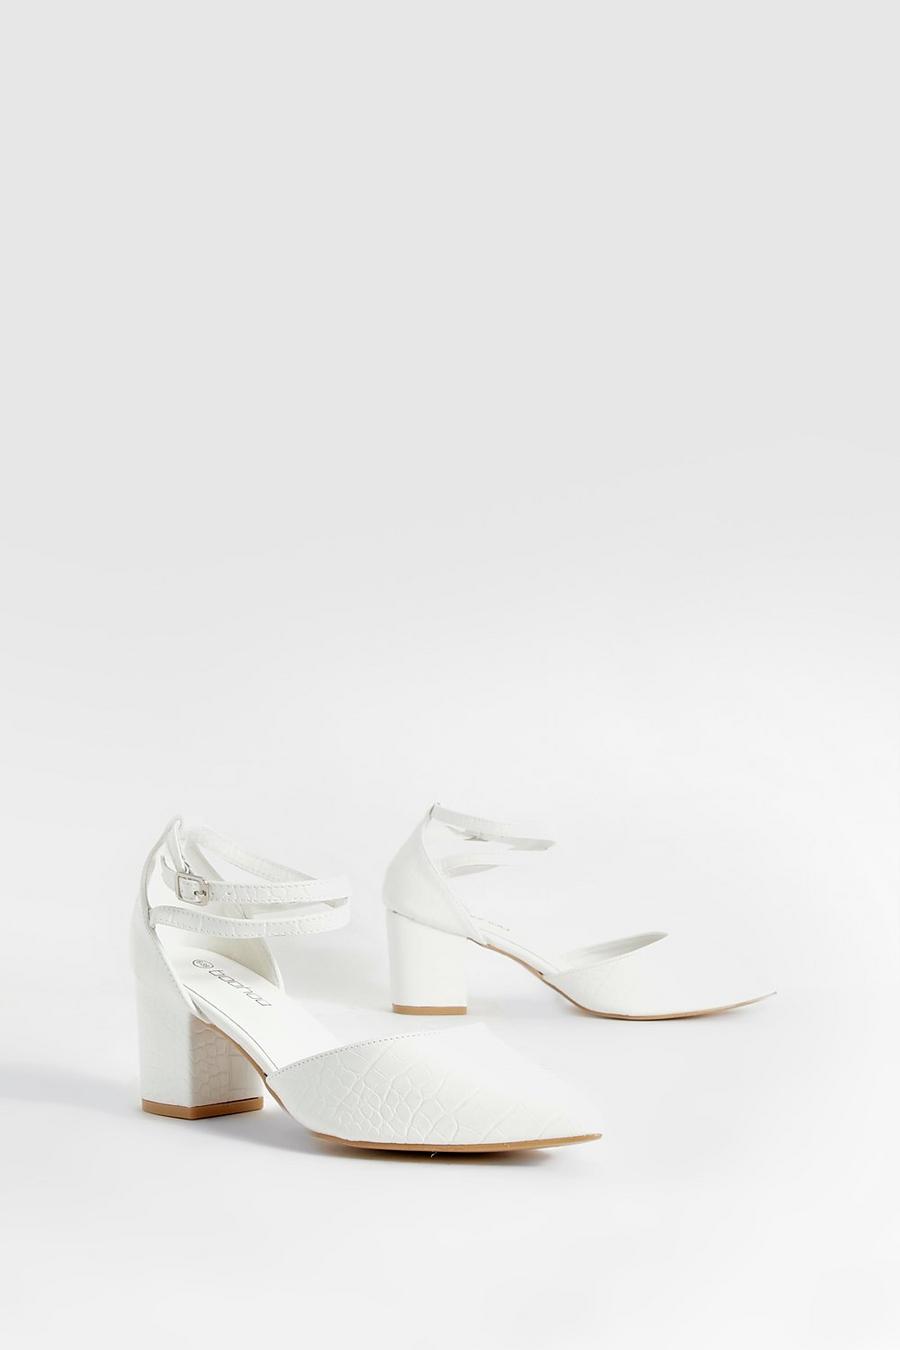 White Wide Width Croc Heeled Pointed Flats